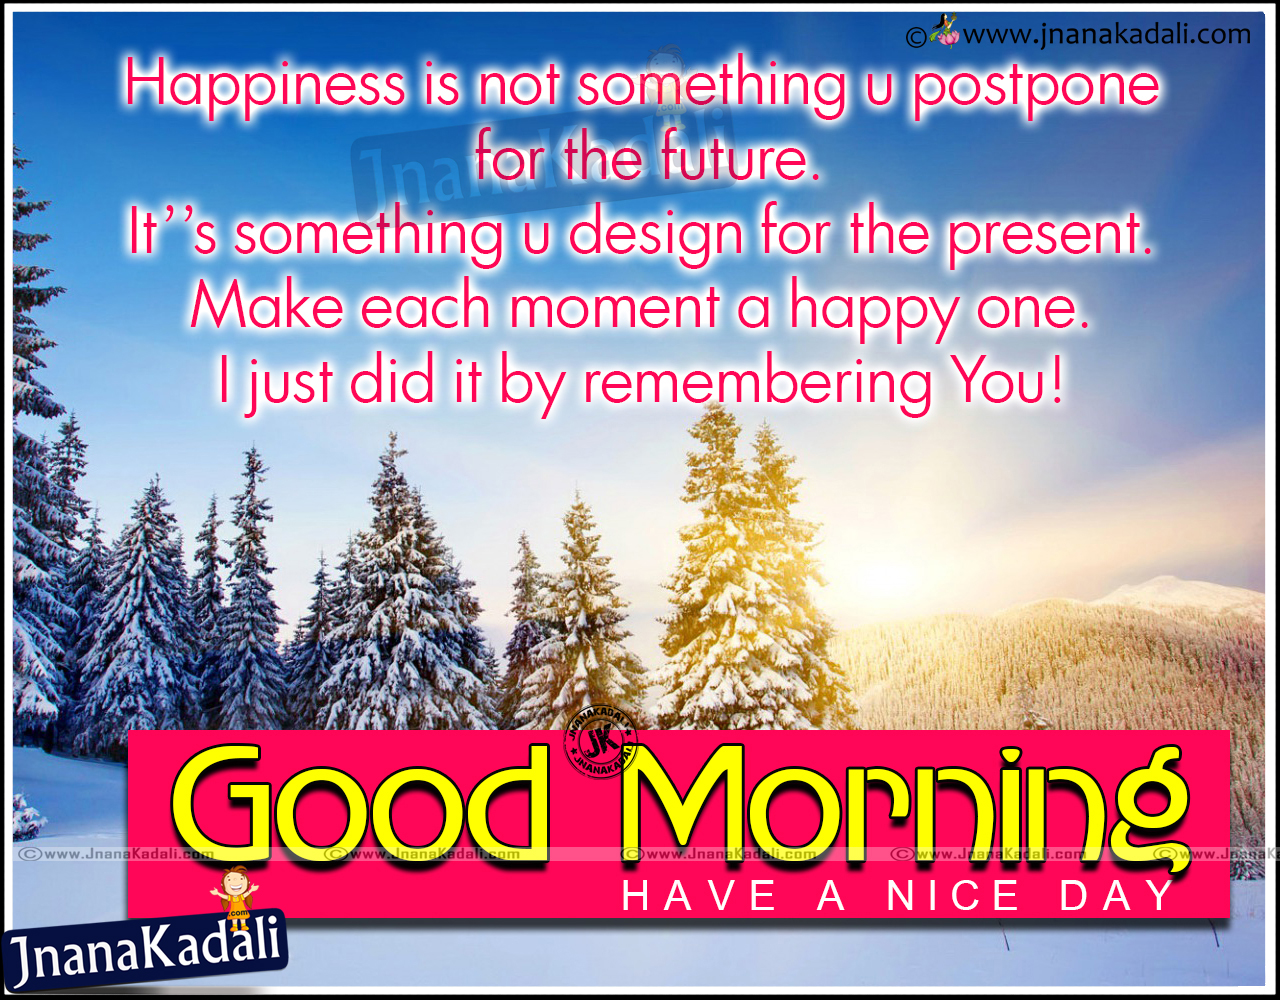 Awesome Have a Nice Day Good morning Greeting Cards Online | JNANA ...